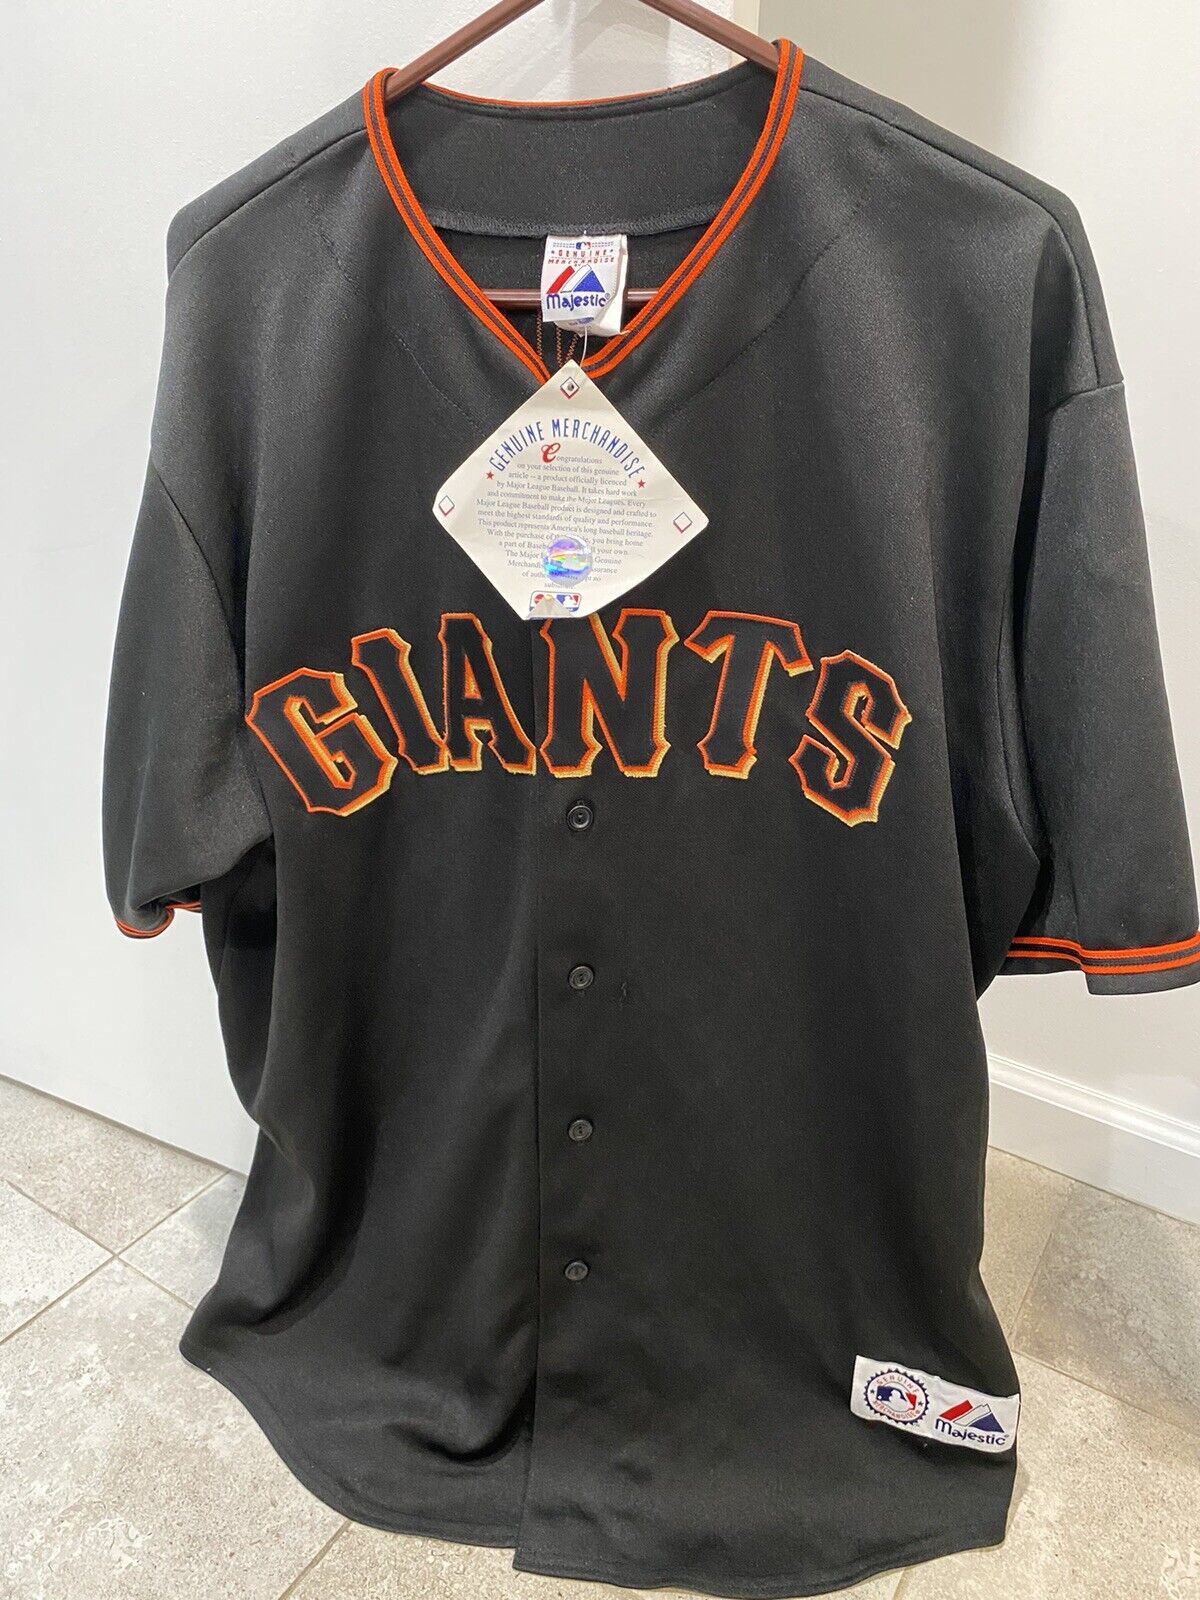 NWT BARRY BONDS SAN FRANCISCO GIANTS JERSEY #25 BLACK SEWN ON MAJESTIC AUTHENTIC